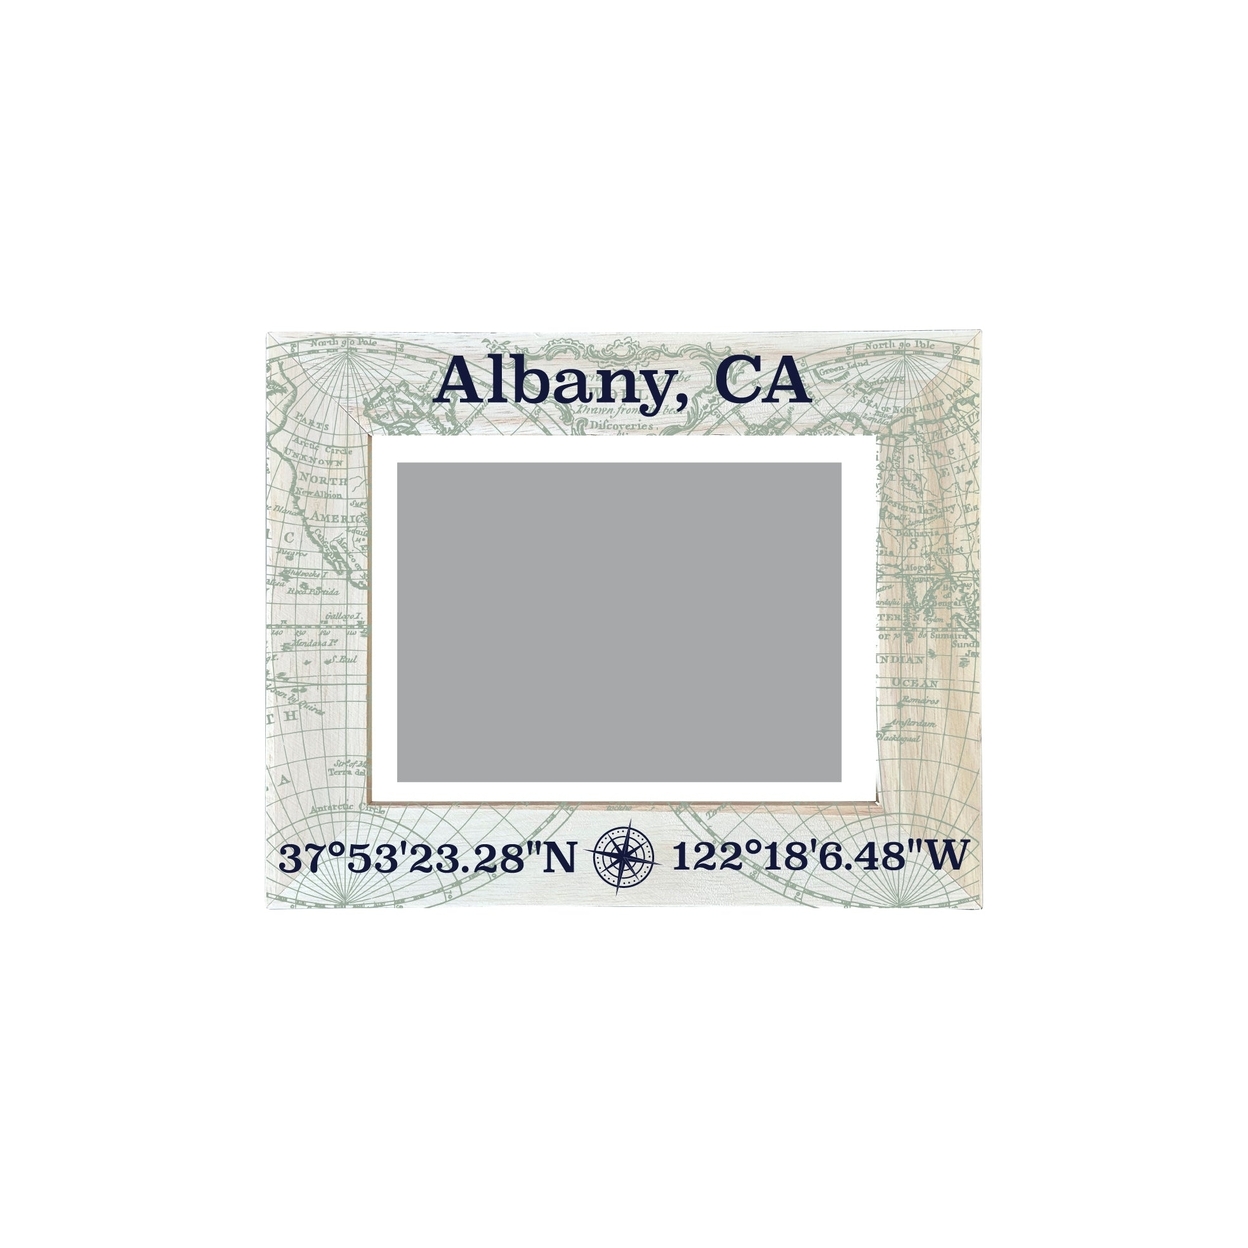 Albany California Souvenir Wooden Photo Frame Compass Coordinates Design Matted To 4 X 6